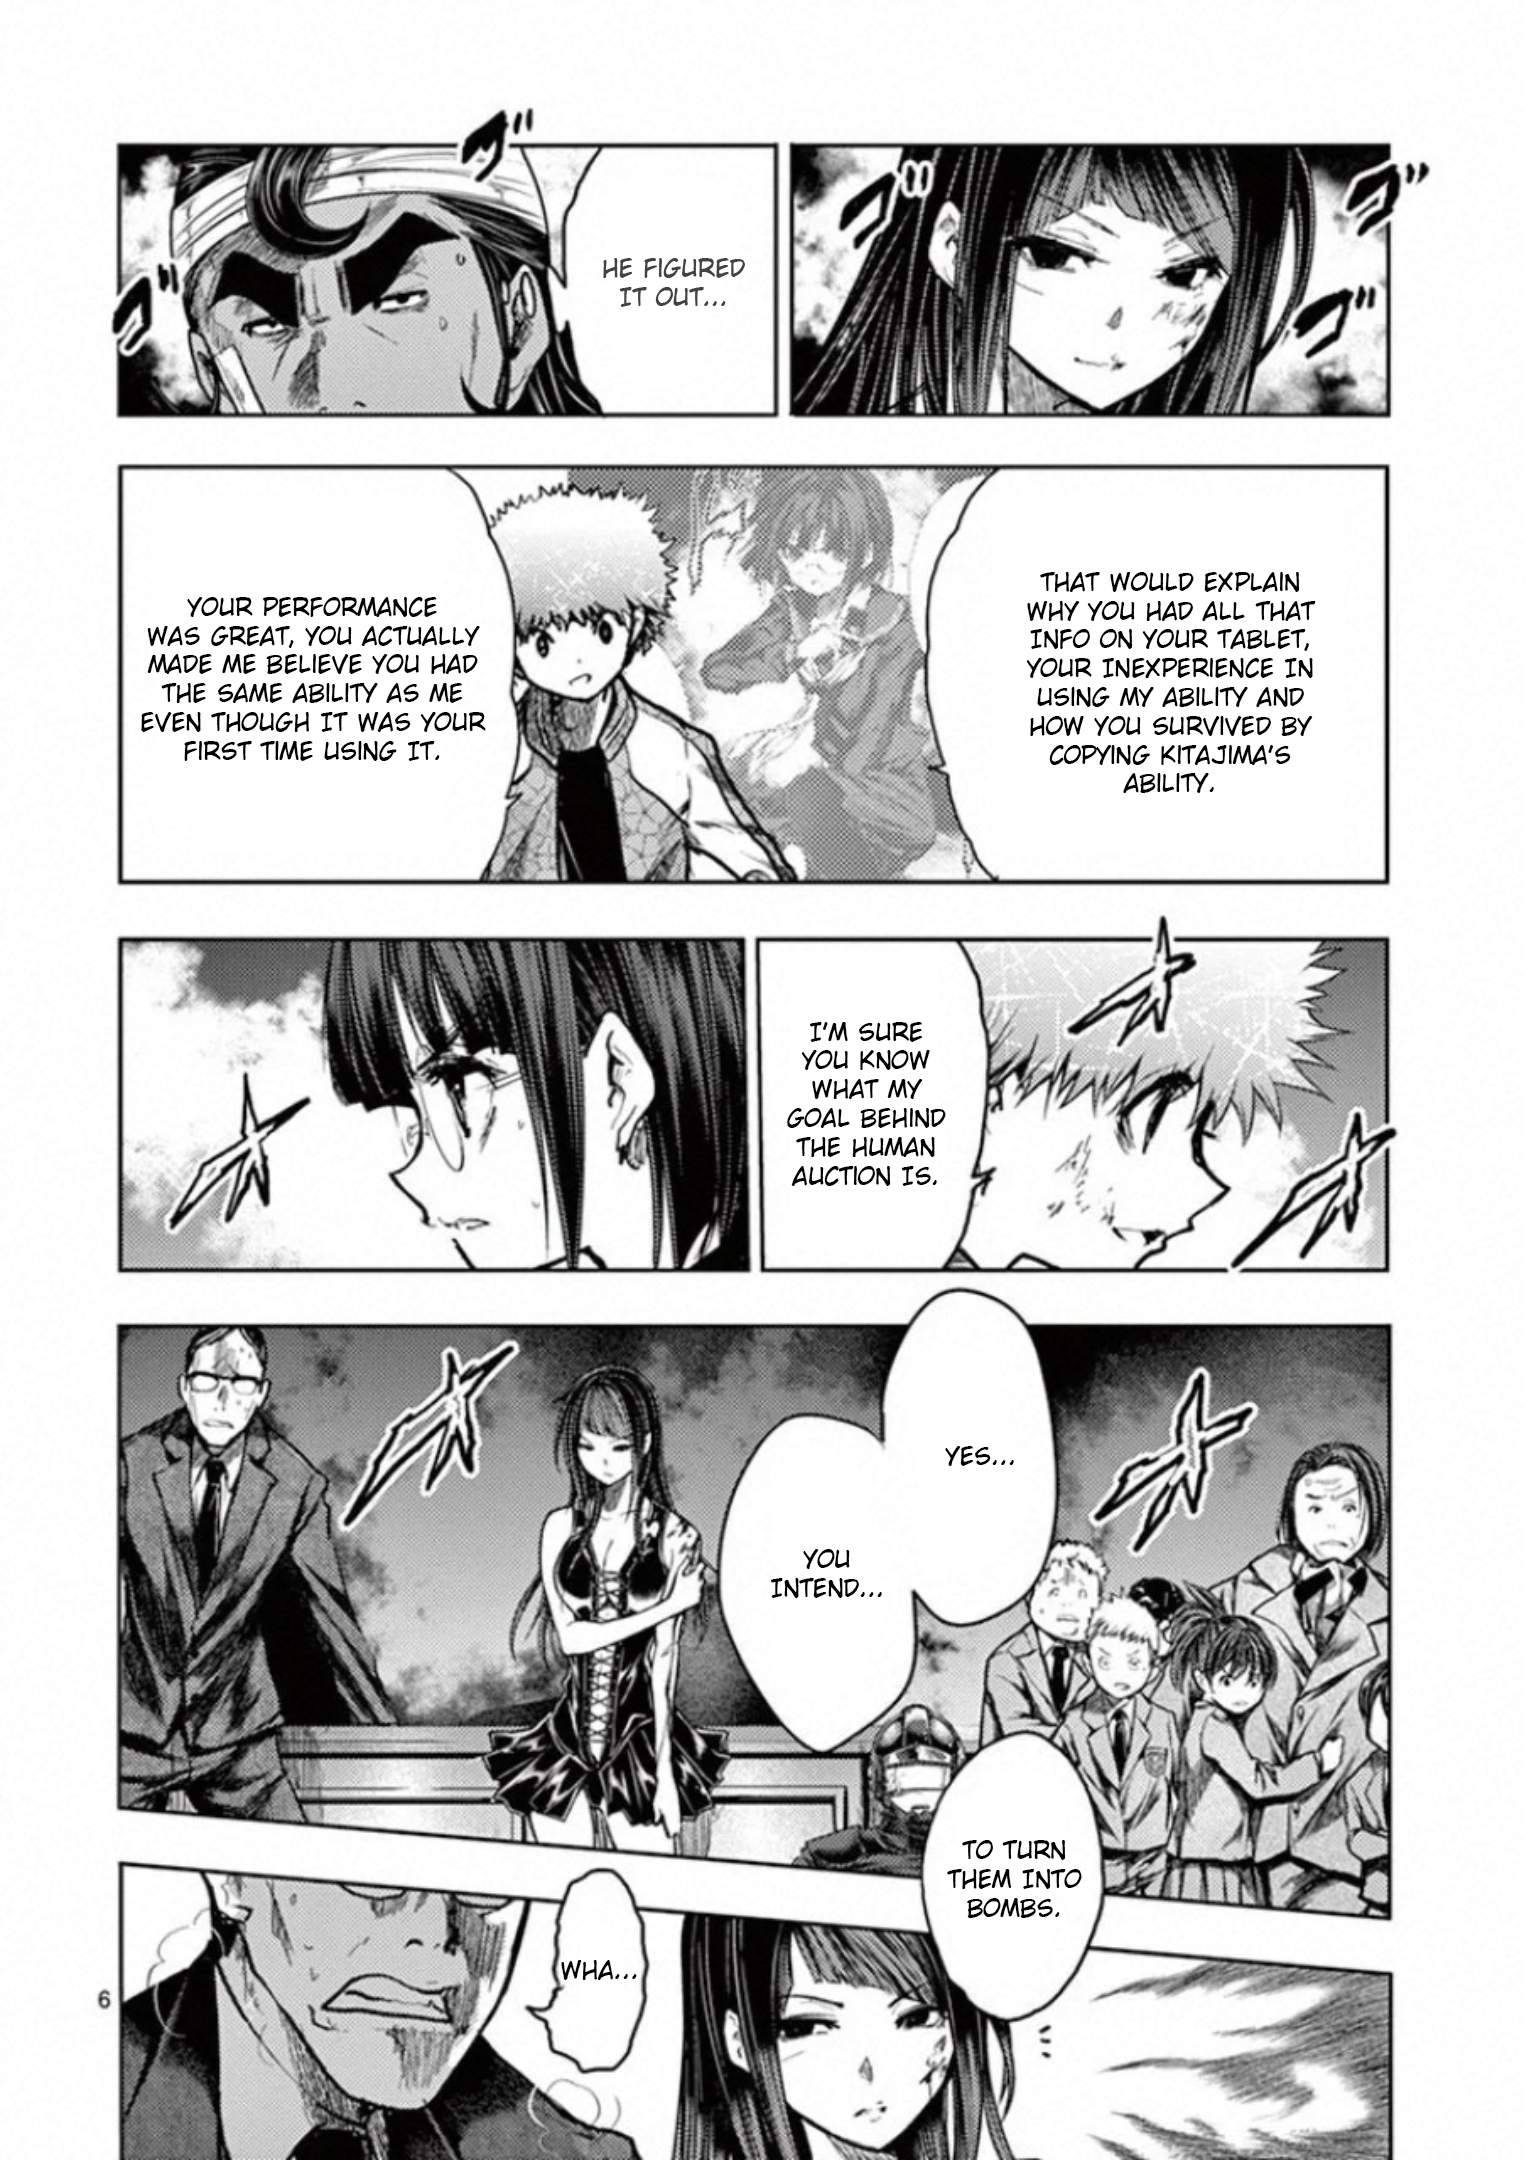 Start Fighting 5 Seconds After Meeting - chapter 122 - #6